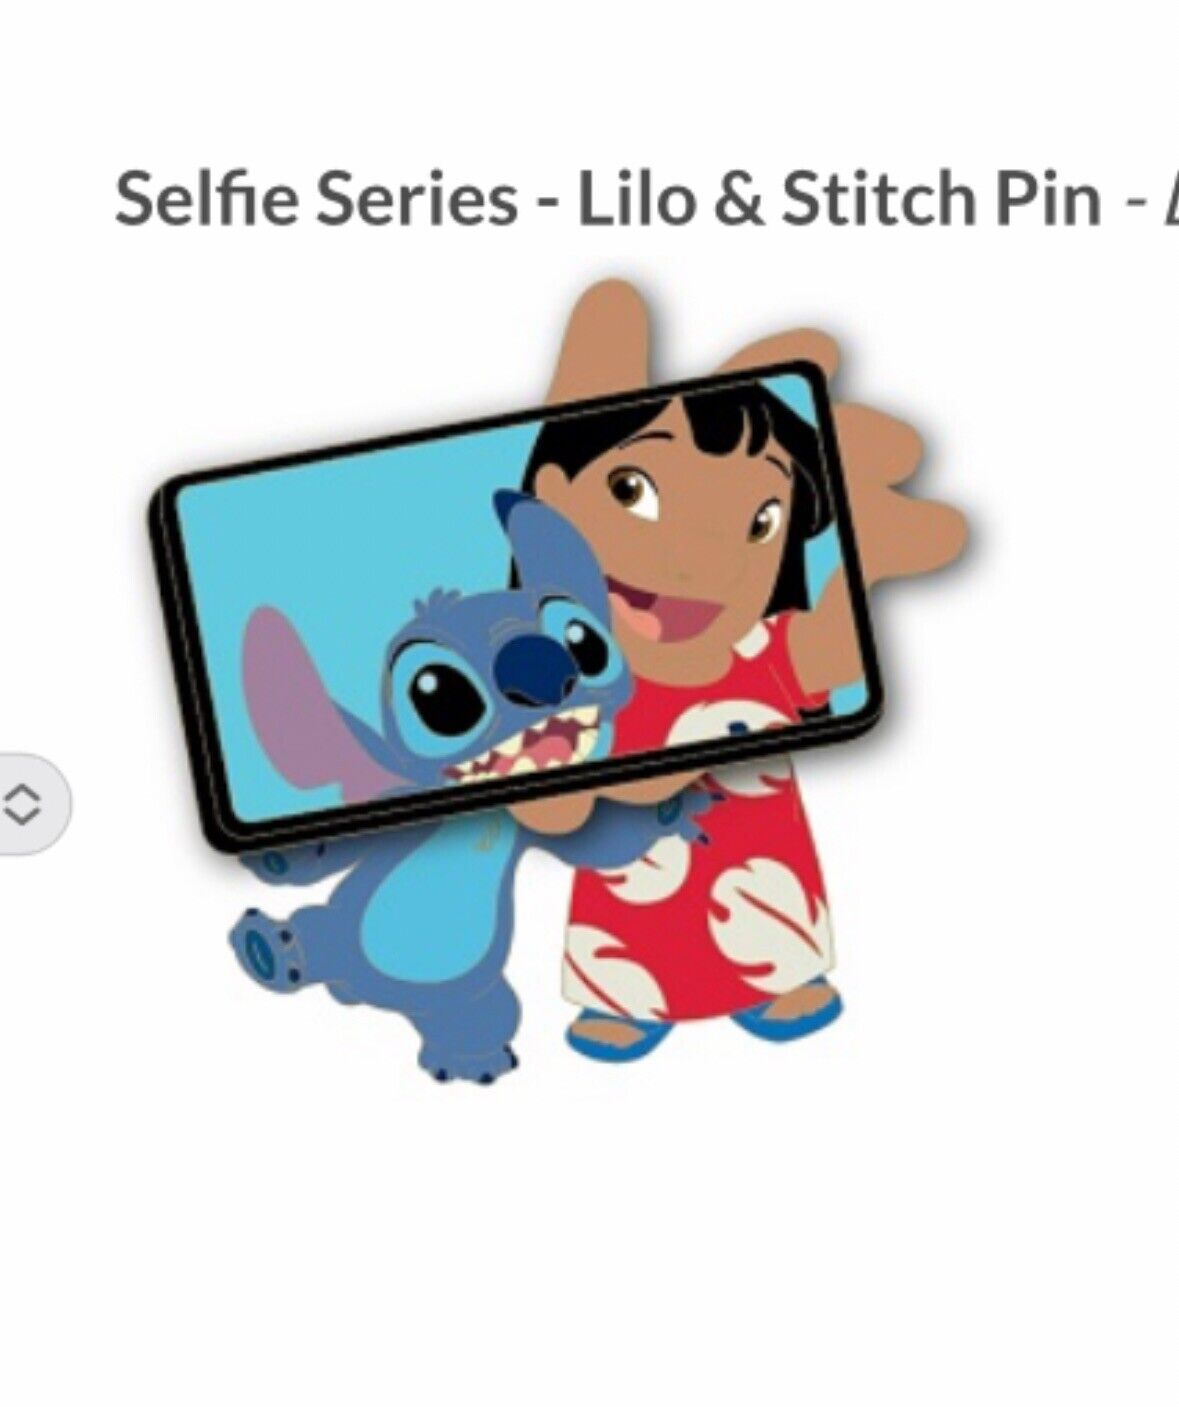 DSSH DSF Lilo & Stitch Selfie Series Pin LE 400 PREORDER Confirmed